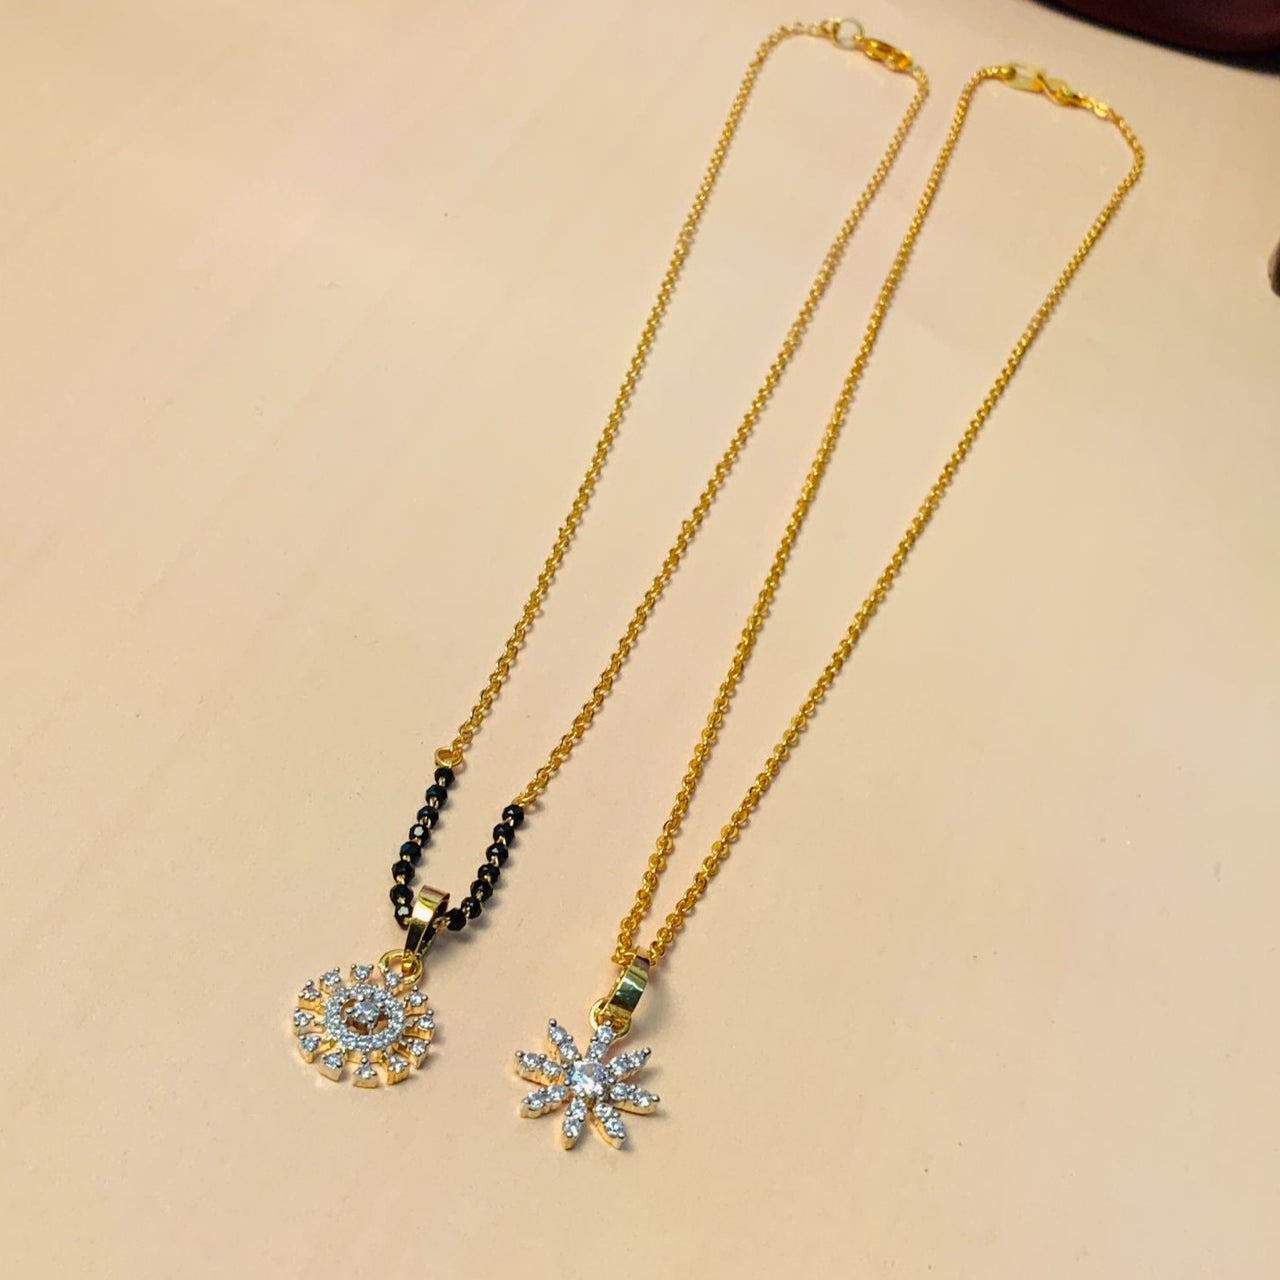 Fascinating Gold Plated American Diamond Mangalsutra & Pendant Chain Combo